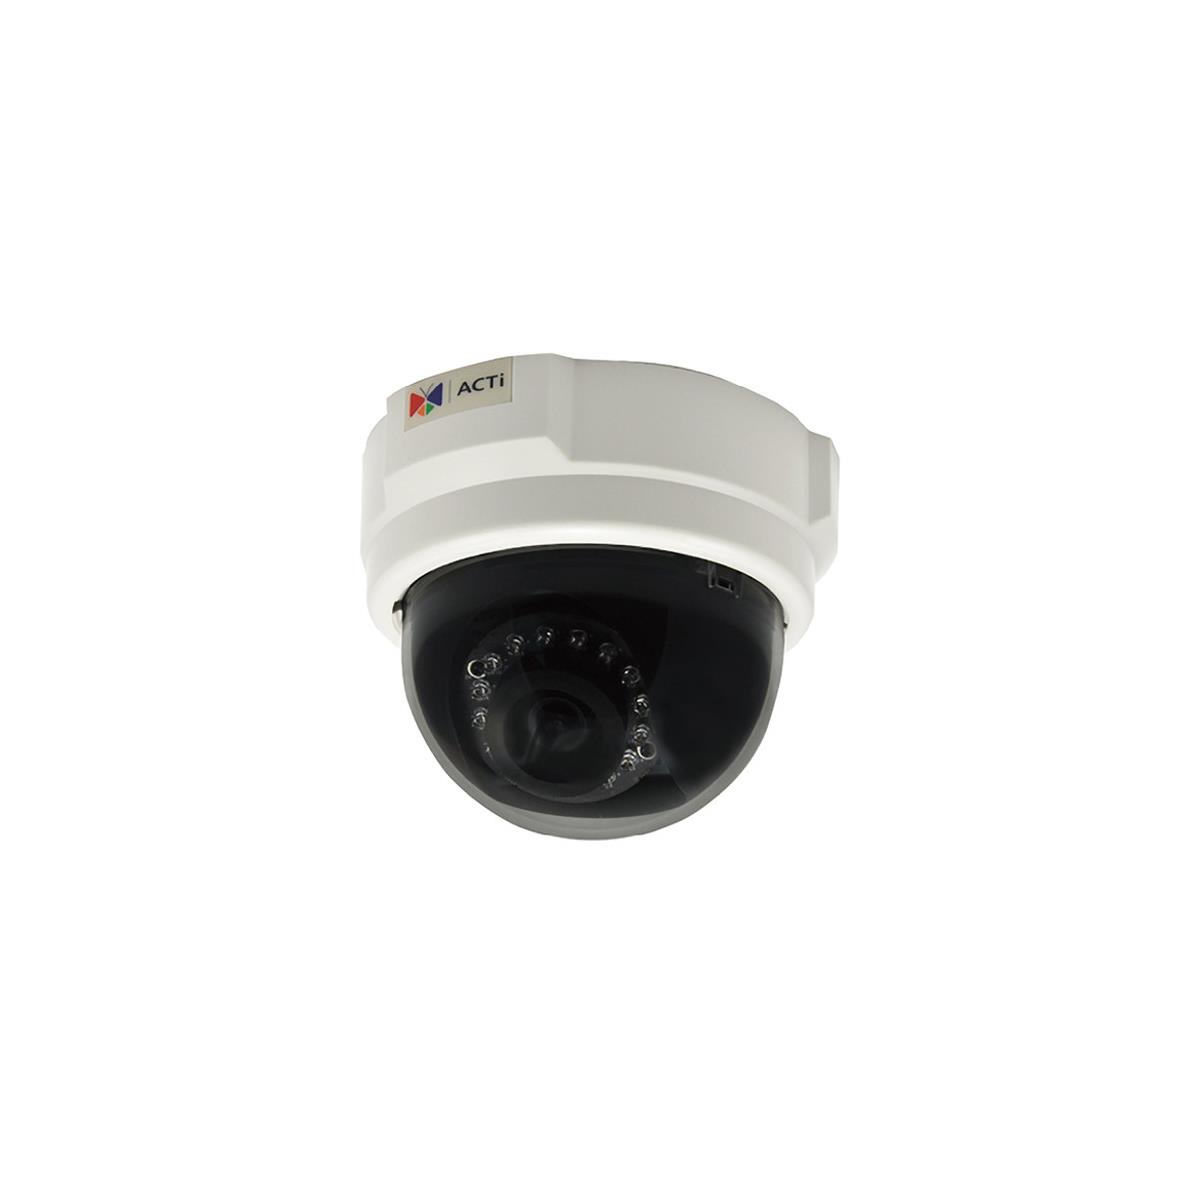 Image of ACTi D55 Day/Night Indoor IP Dome Camera